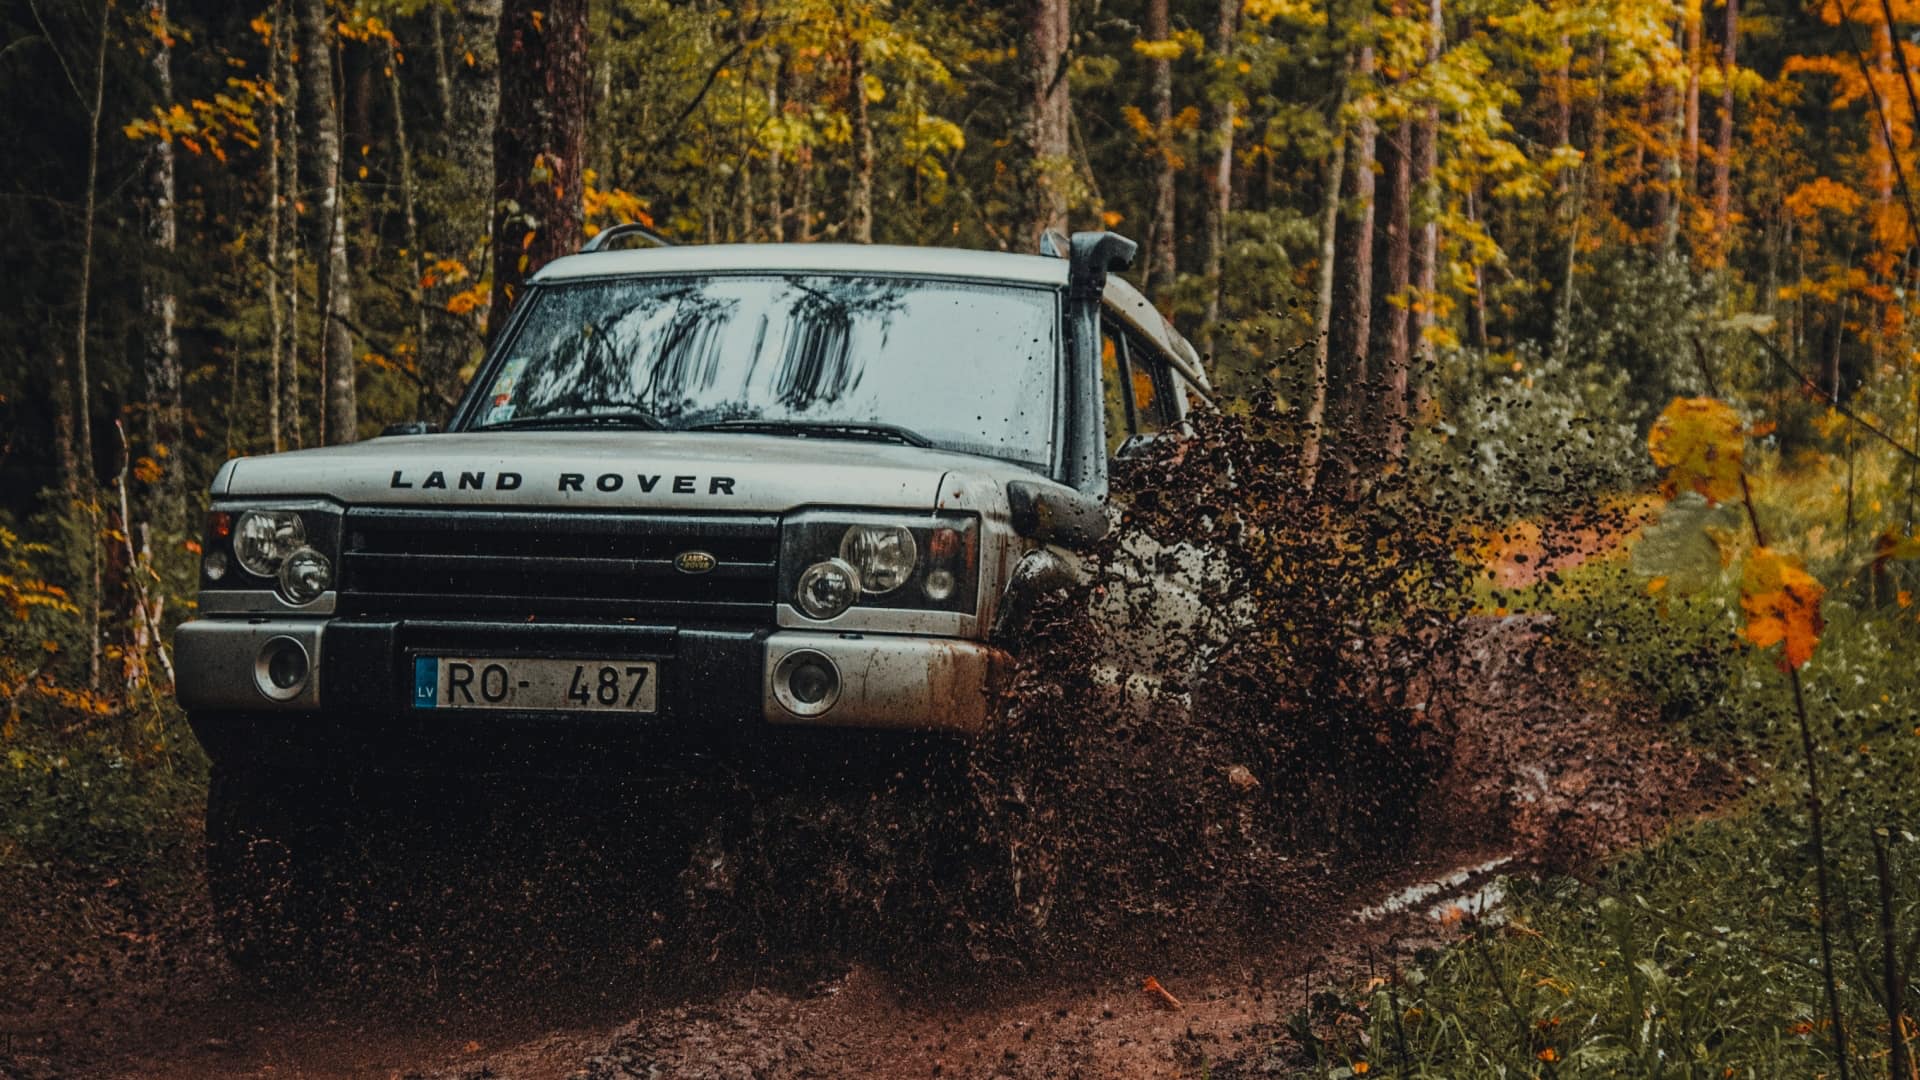 A Land rover plows through a muddy puddle. Surrounded by trees.